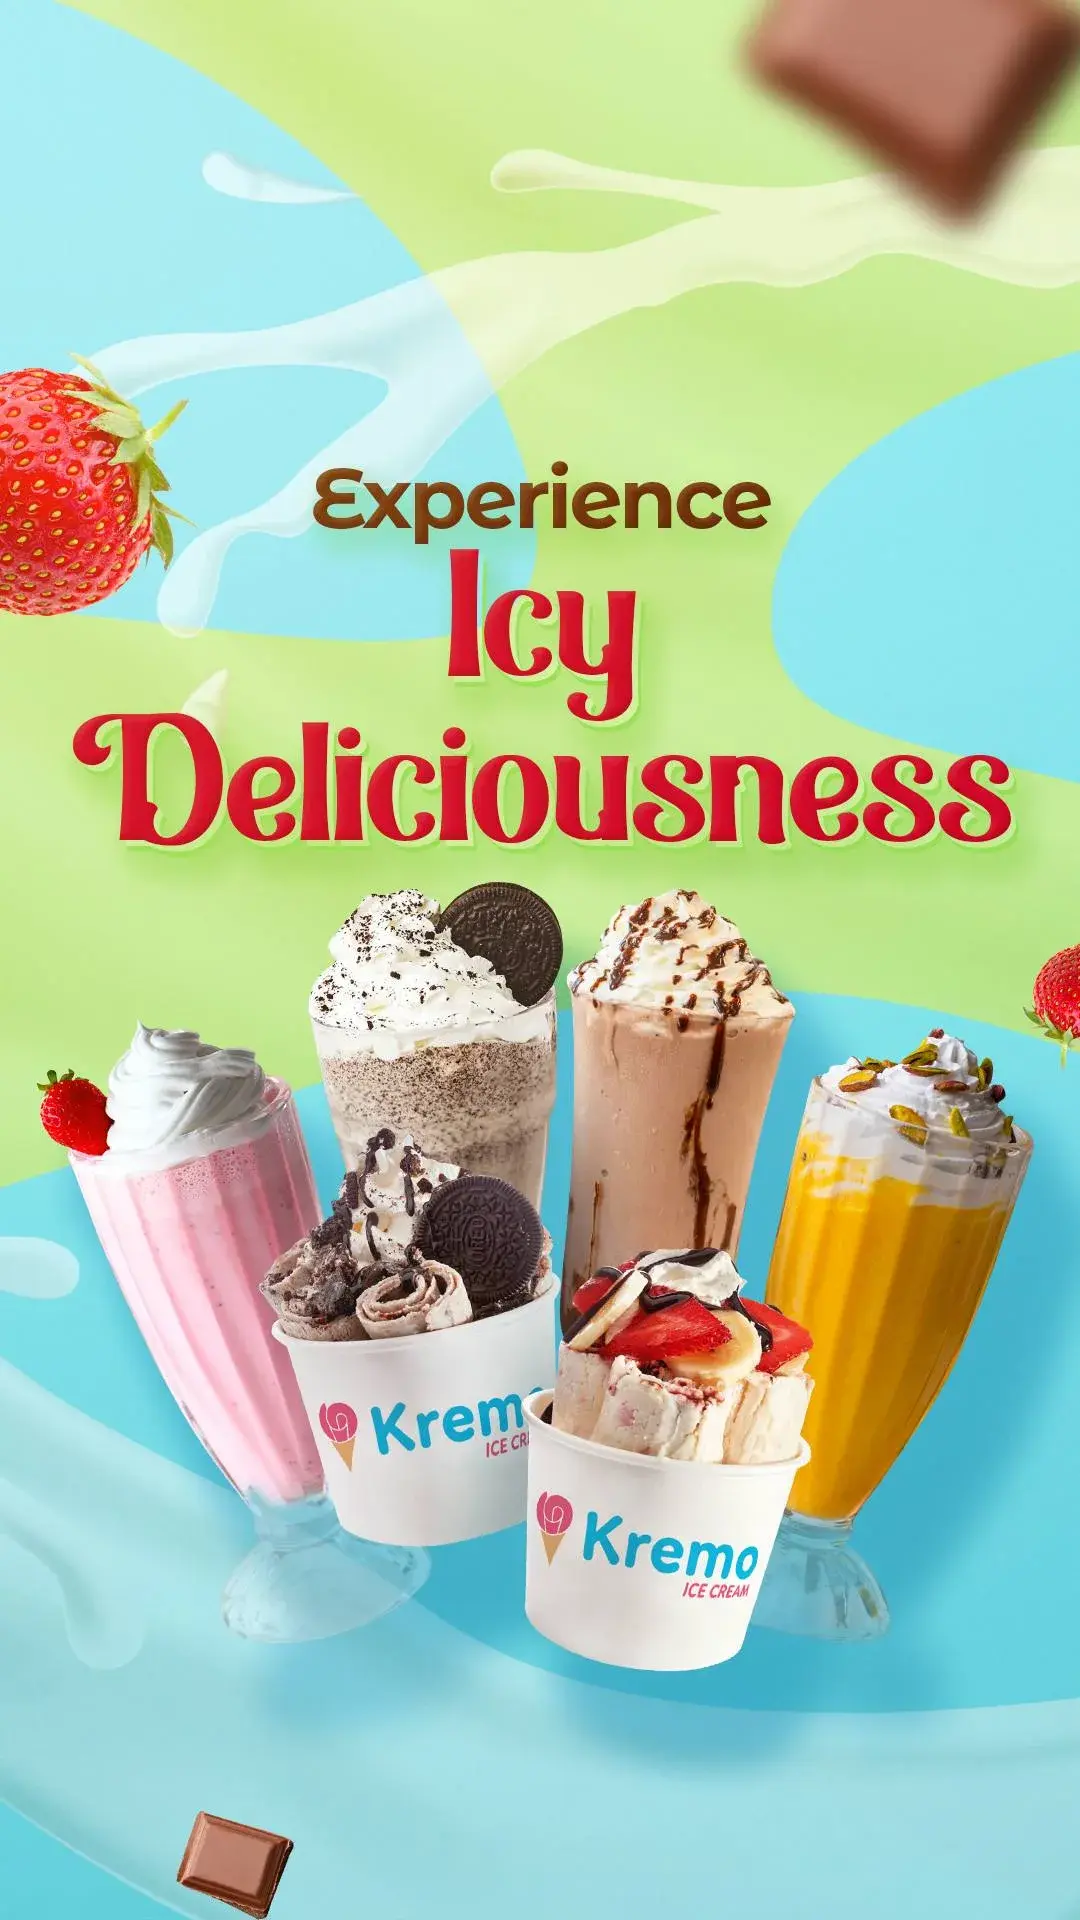 Experience icy deliciousness.